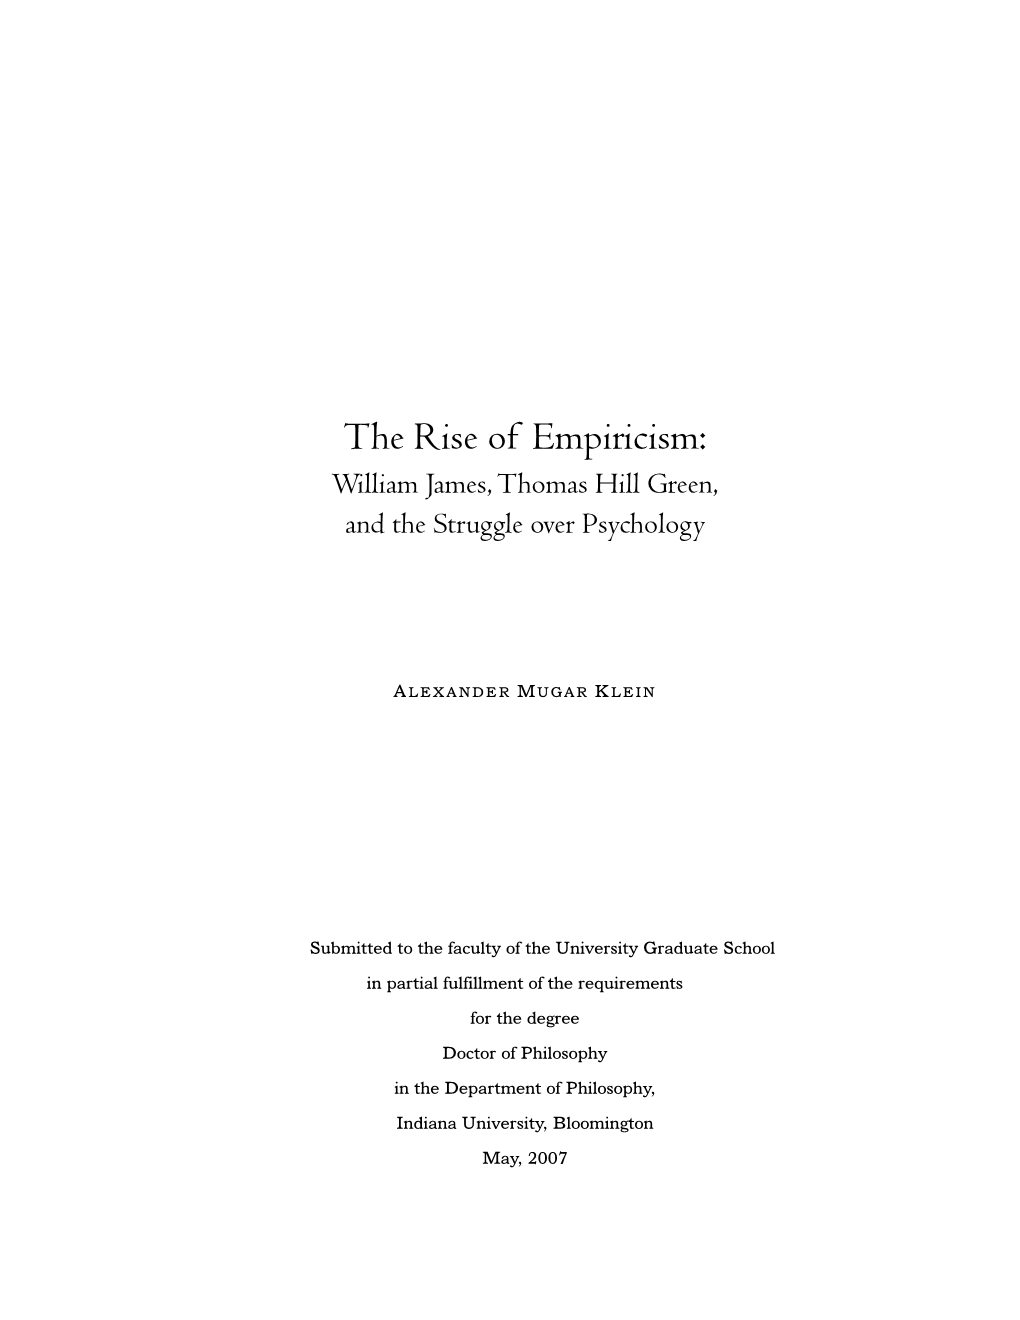 The Rise of Empiricism: William James, Thomas Hill Green, and the Struggle Over Psychology